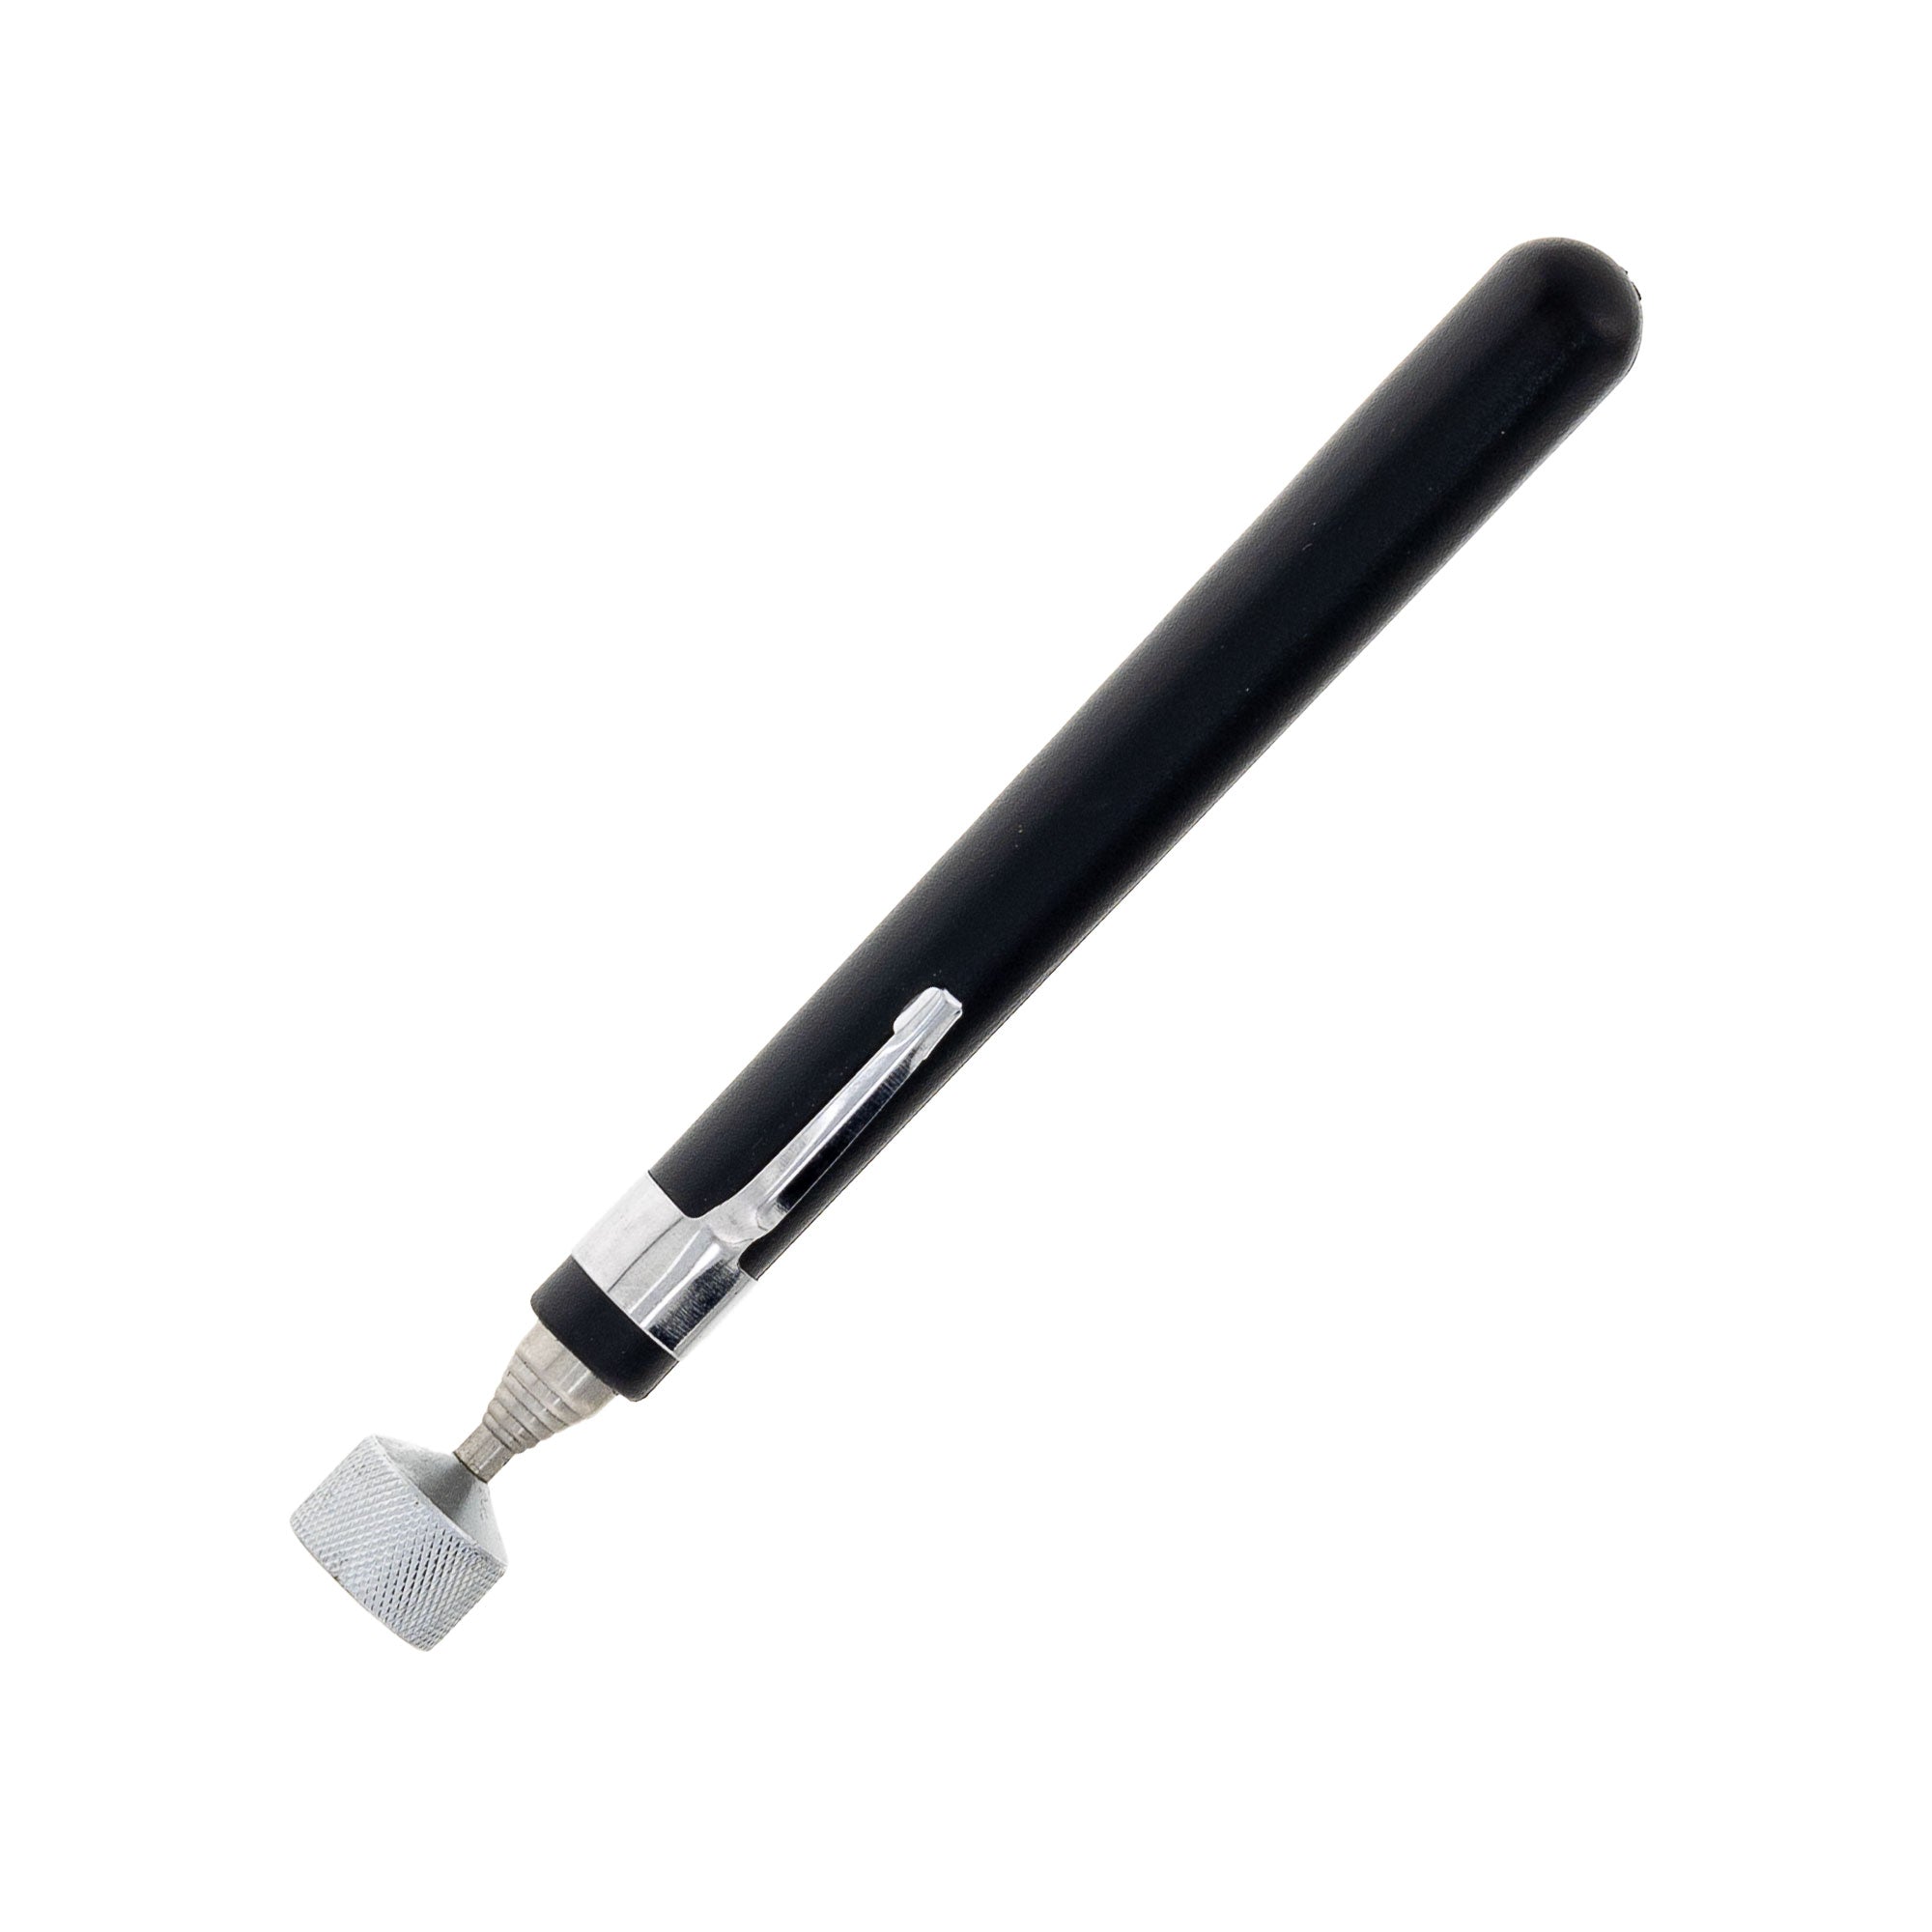 Polaris 2830435 Black 6.5"-33" Telescopic Powerful Magnet Tool Holds Up To 5 lbs OEM